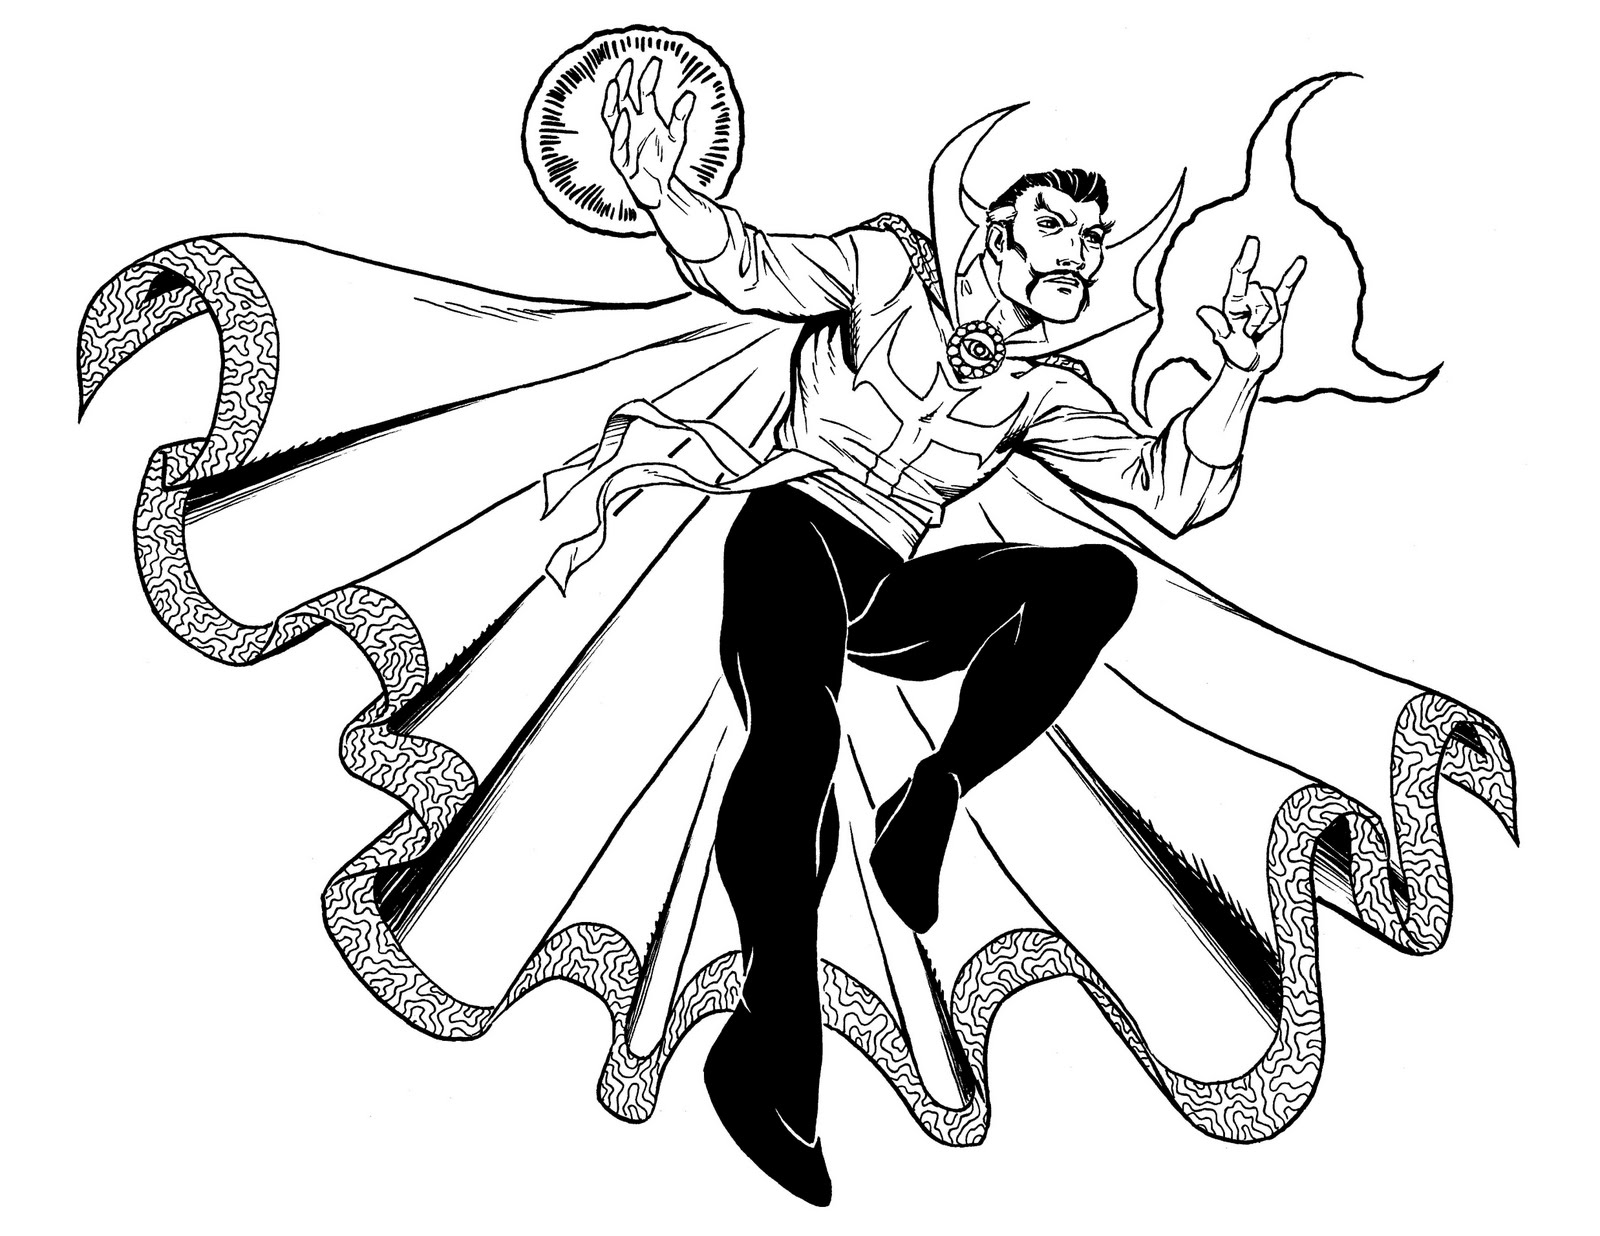 Doctor Strange Show His Skill Coloring Page - Free Printable Coloring